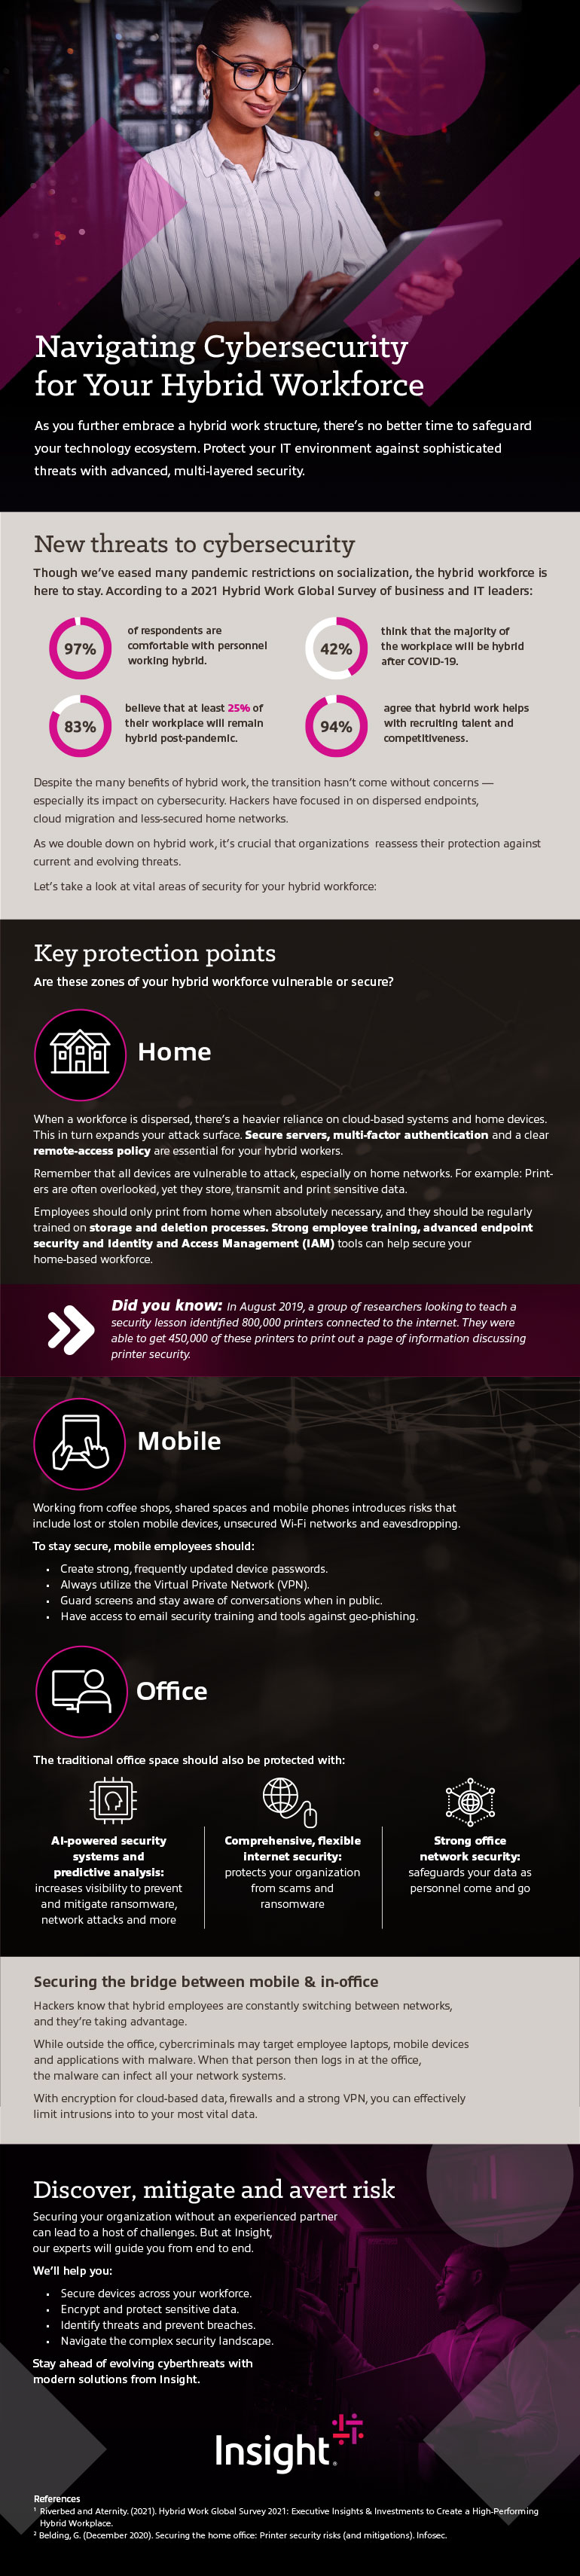 Navigating Cybersecurity for Your Hybrid Workforce infographic as transcribed below